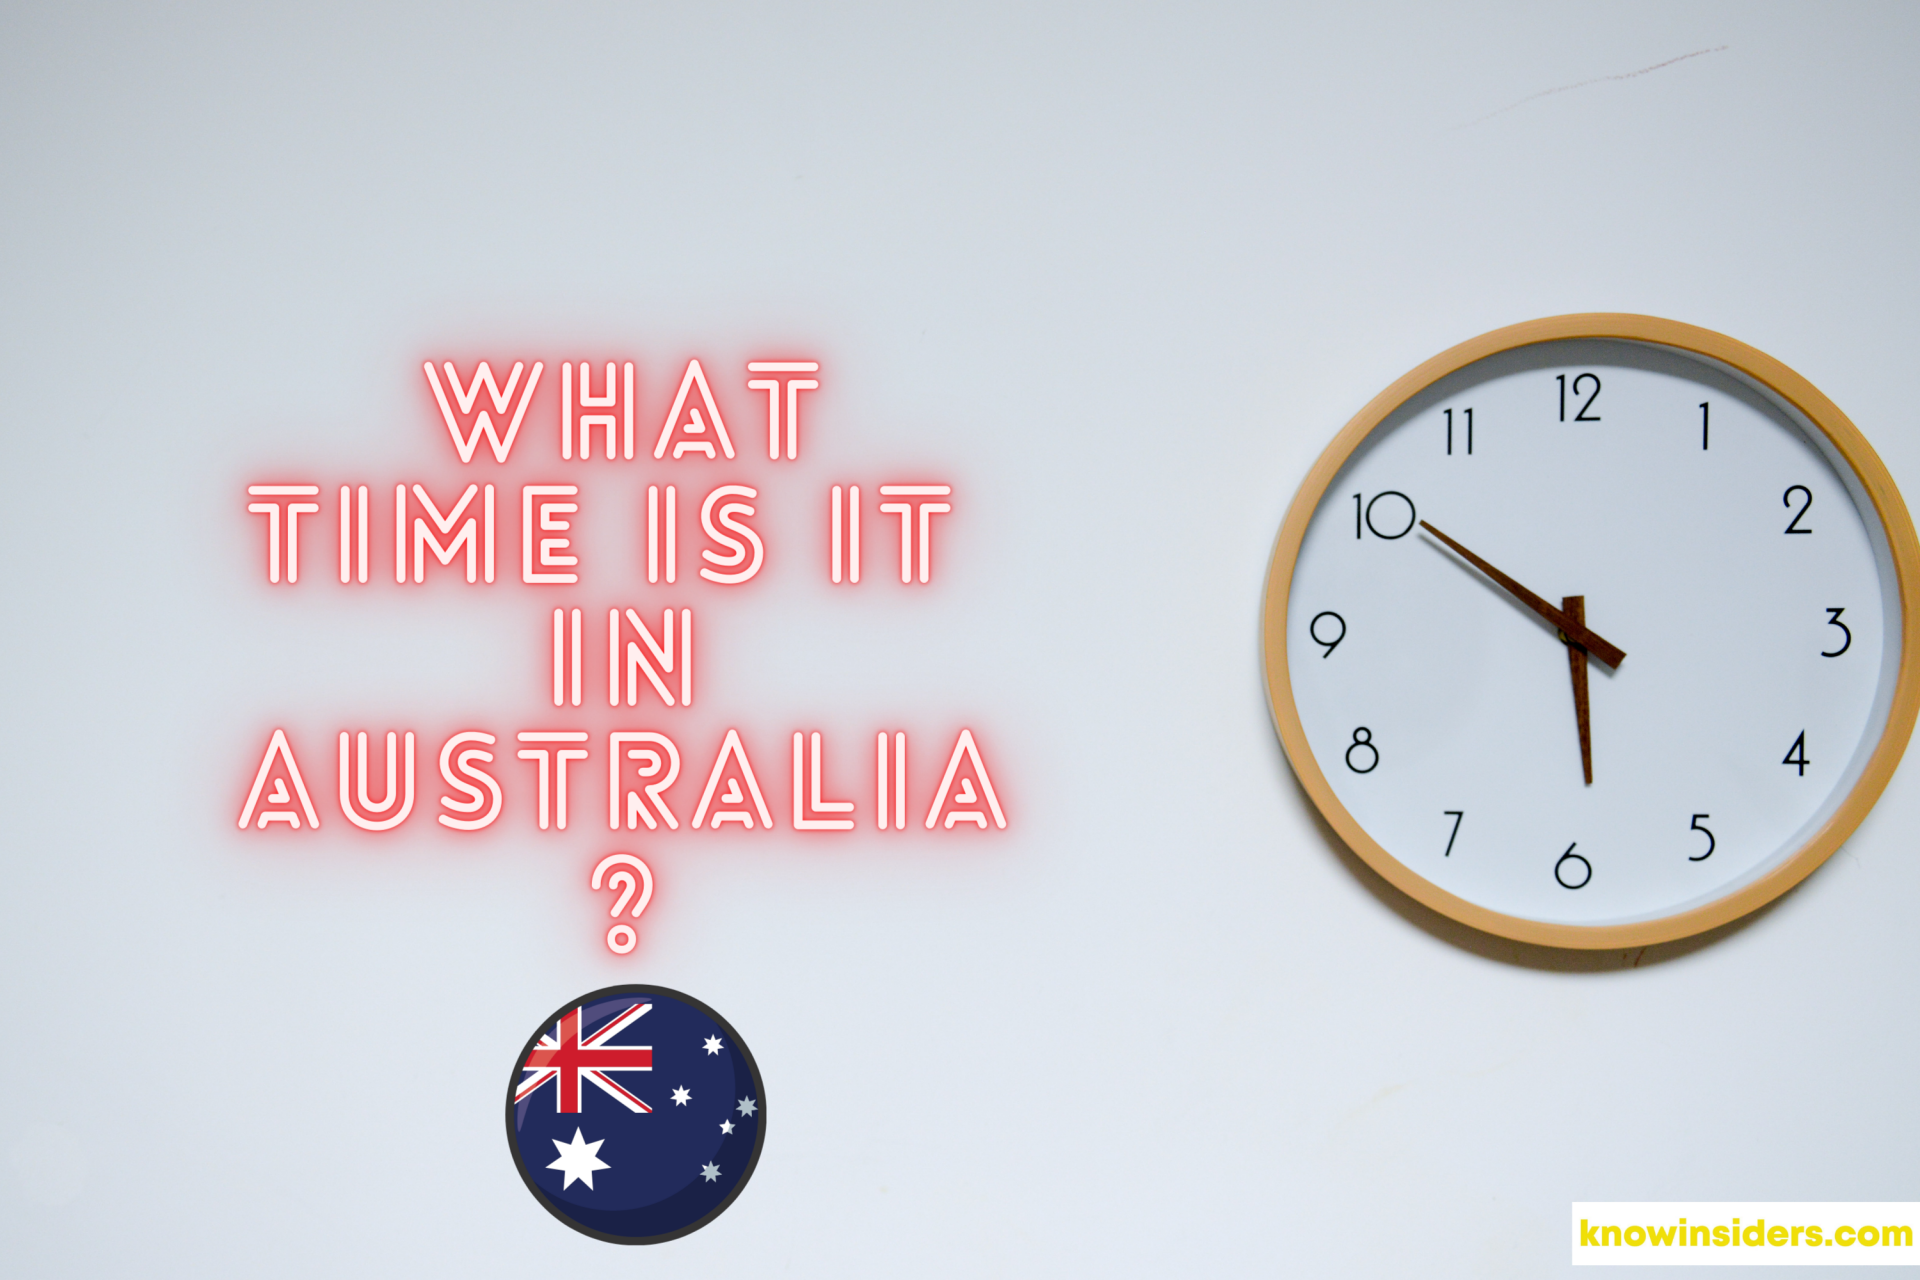 What Time Is It In Australia: Time Difference Between Australia and US, Time Zone